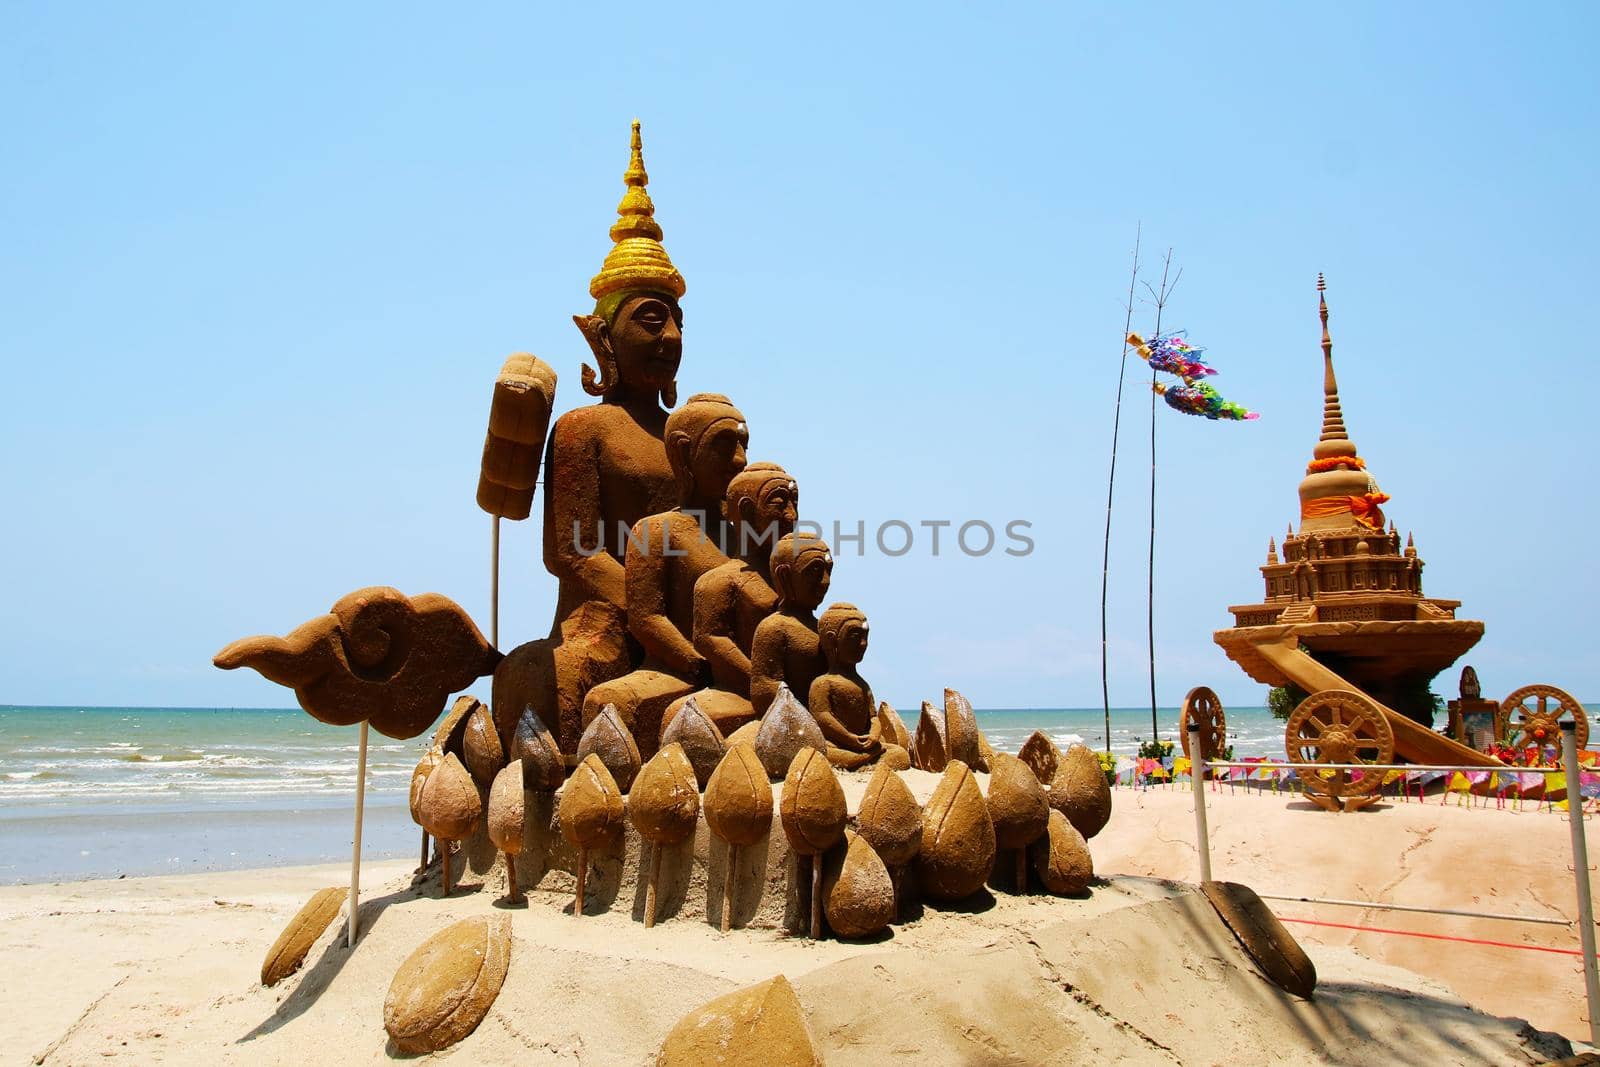 five lord buddha sand pagoda in Songkran festival represents In order to take the sand scraps attached to the feet from the temple to return the temple in the shape of a sand pagoda